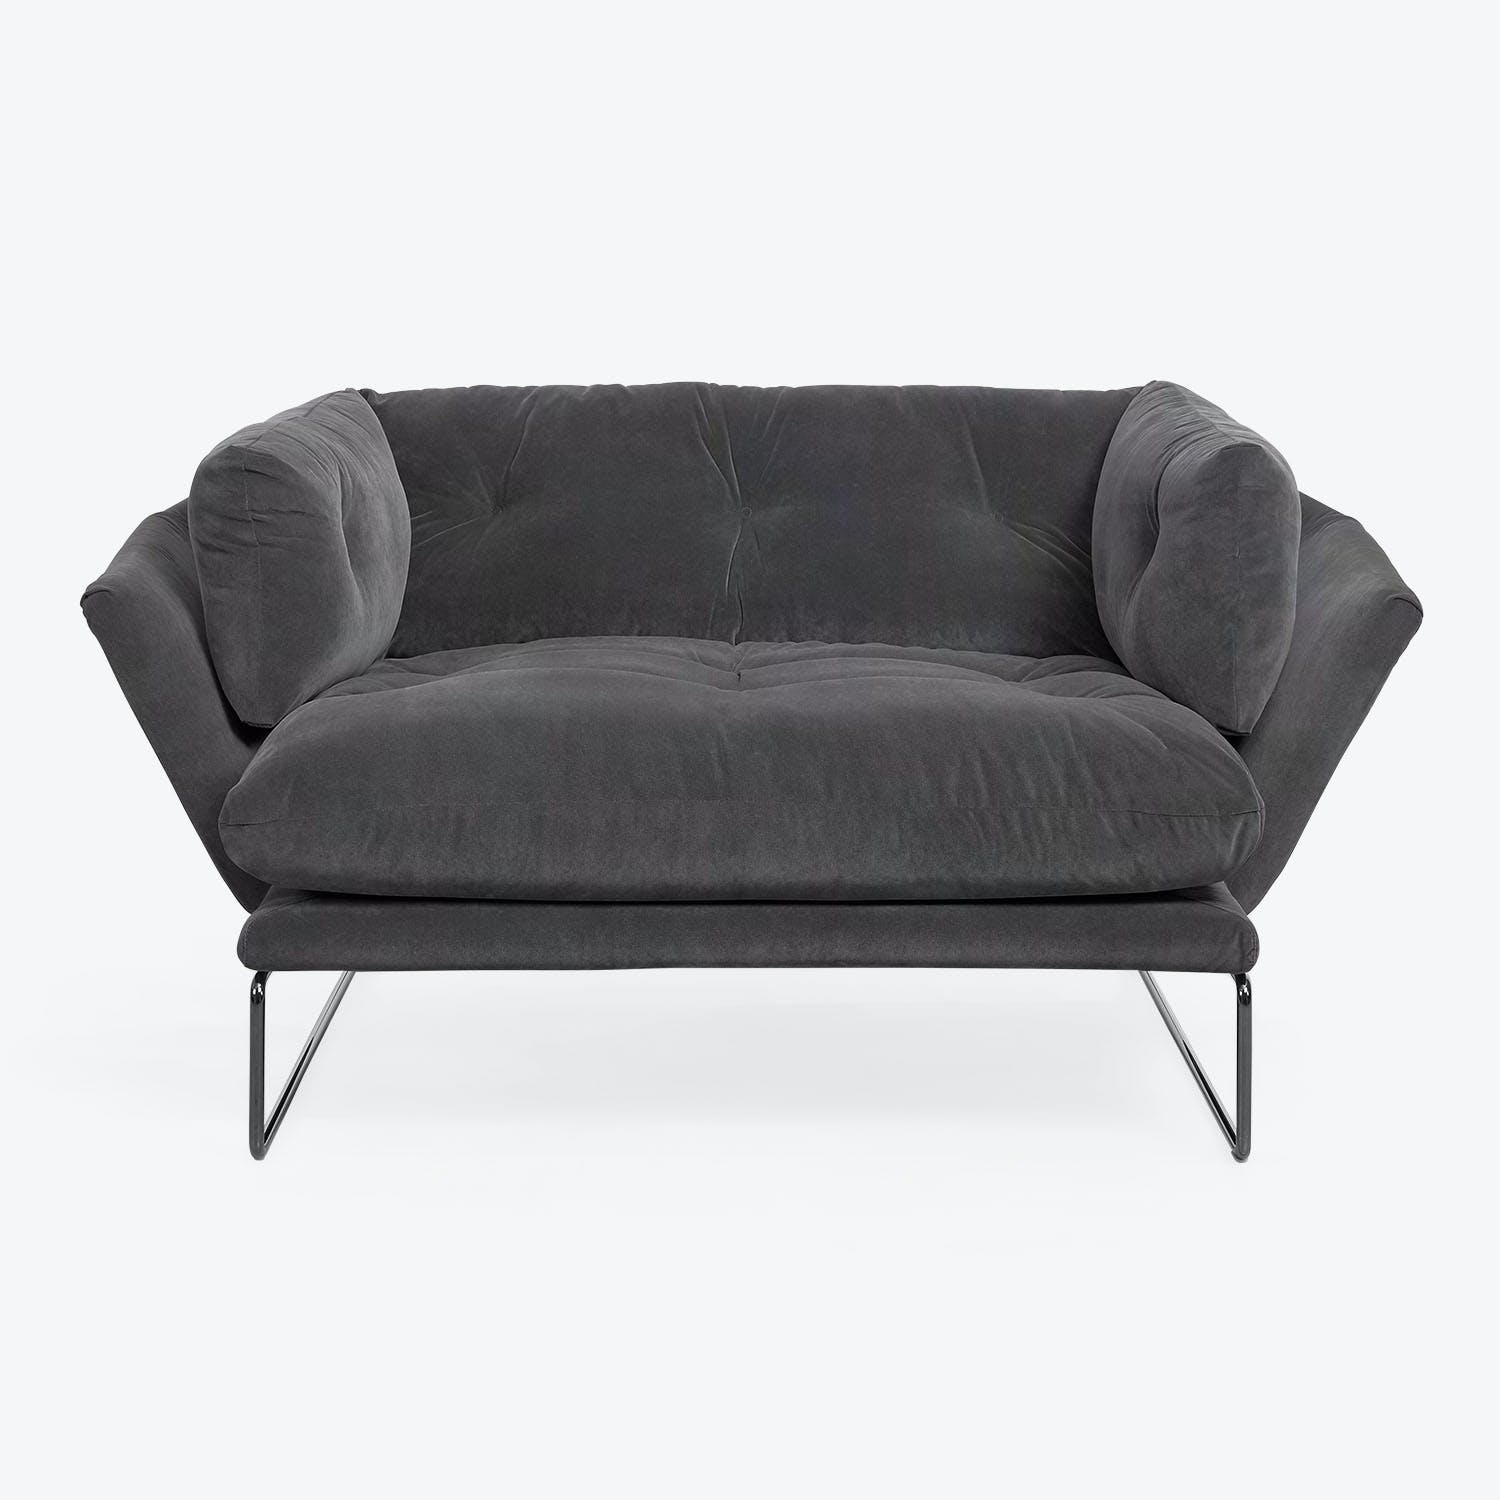 Contemporary charcoal gray sofa with plush cushions and sleek metal frame.